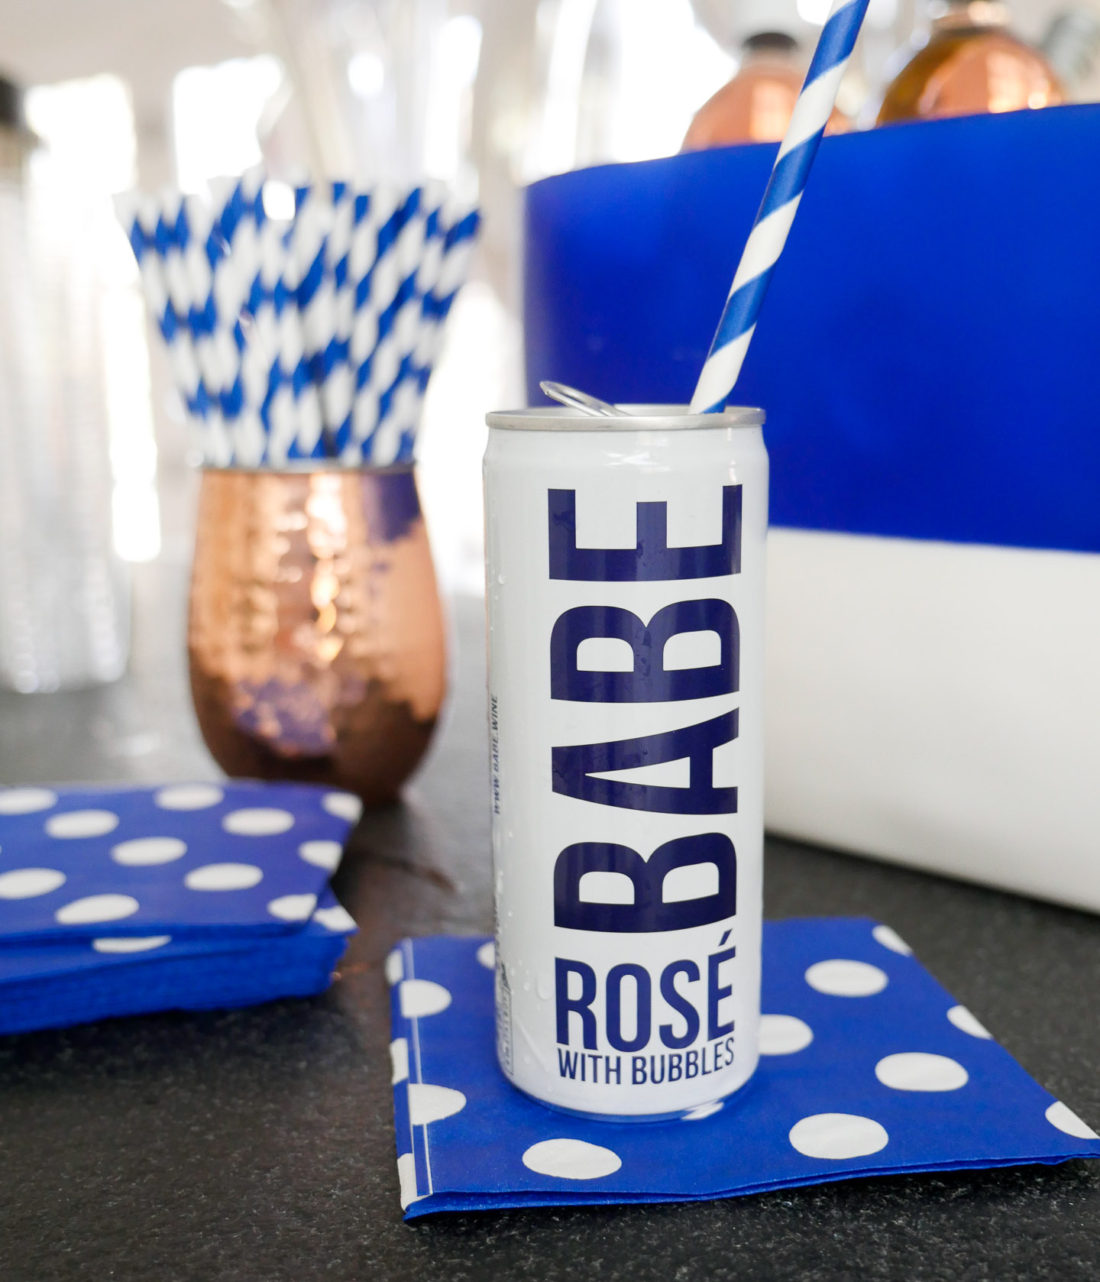 Babe Rose with bubbles pictured on a blue and white polka dot napkin with a blue and white striped straw 